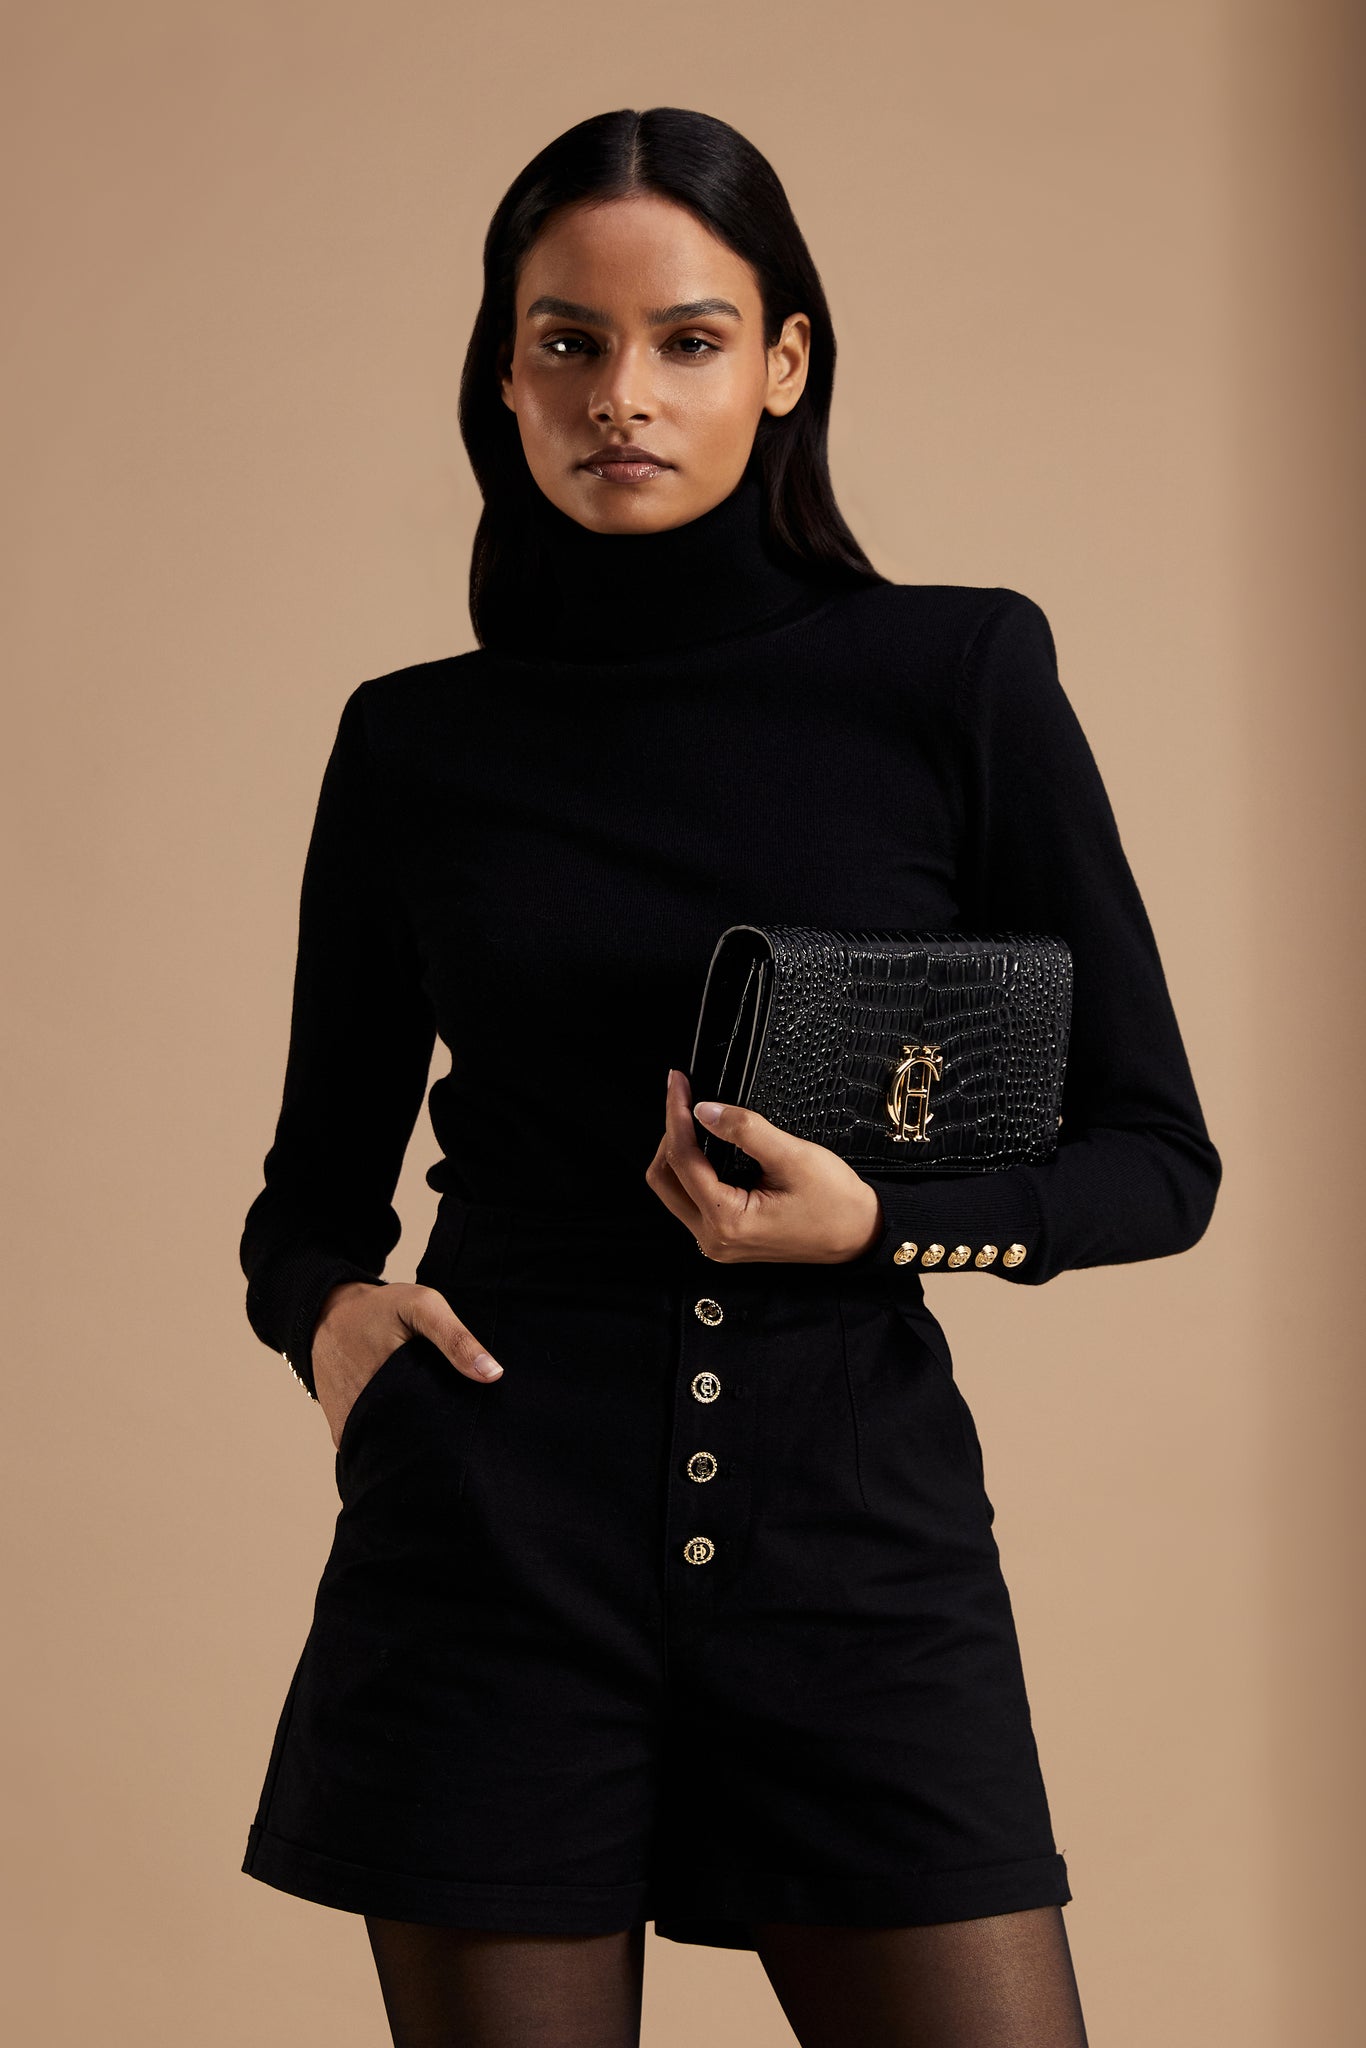 womens black tailored shorts with two single knife pleats and black and gold front button detail with a turned up hem worn with black roll neck and black croc embossed clutch bag